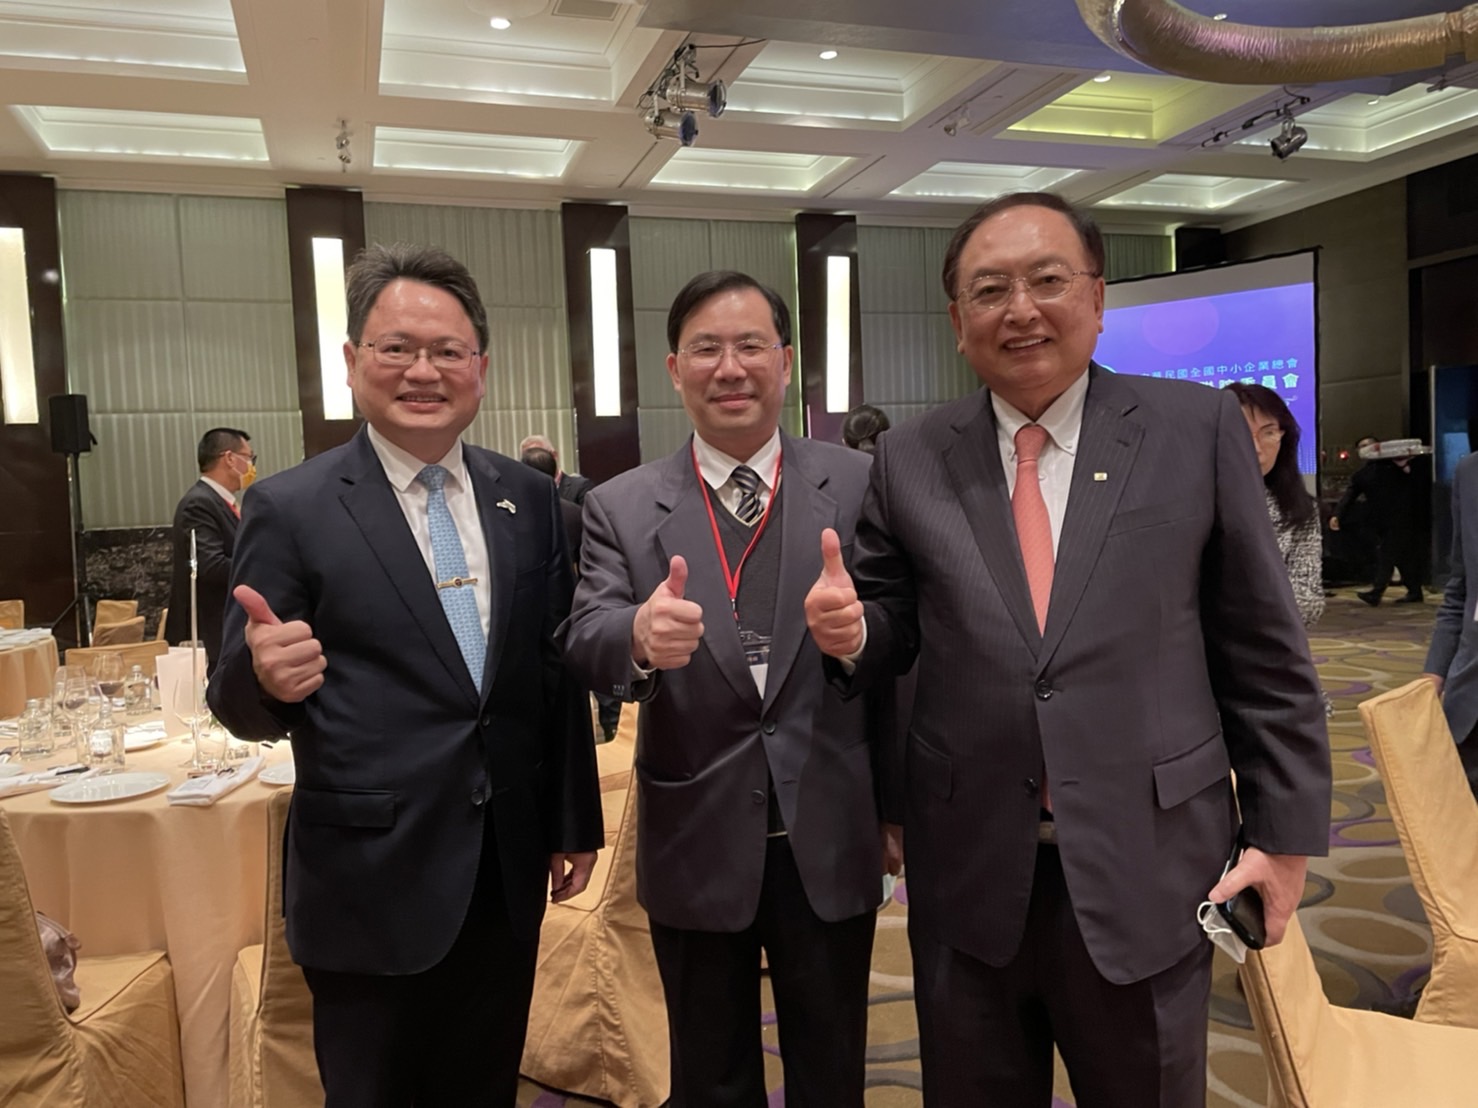 President Gary Chen of the SMEs Award Fellowship Committee came to congratulate the new companies that won the 30th of  SMEs Award and the 23rd Overseas of SMEs Award